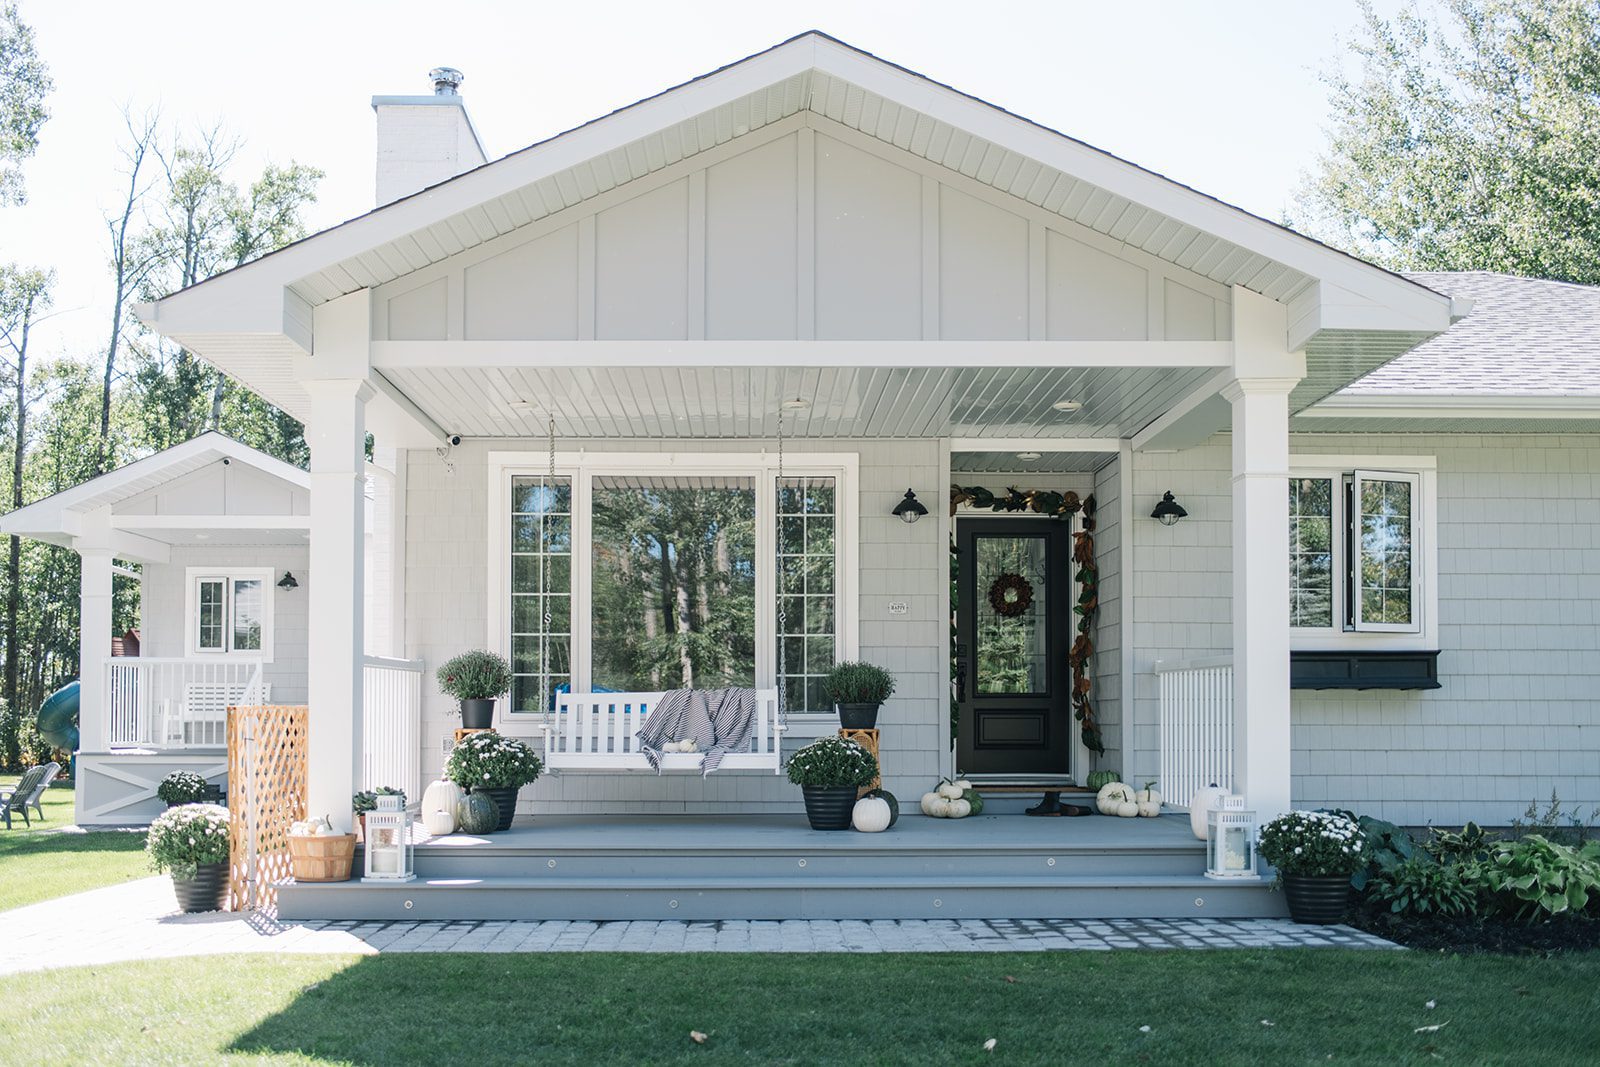 Modern country farmhouse with grey shingles and board and batten, black door and porch swing